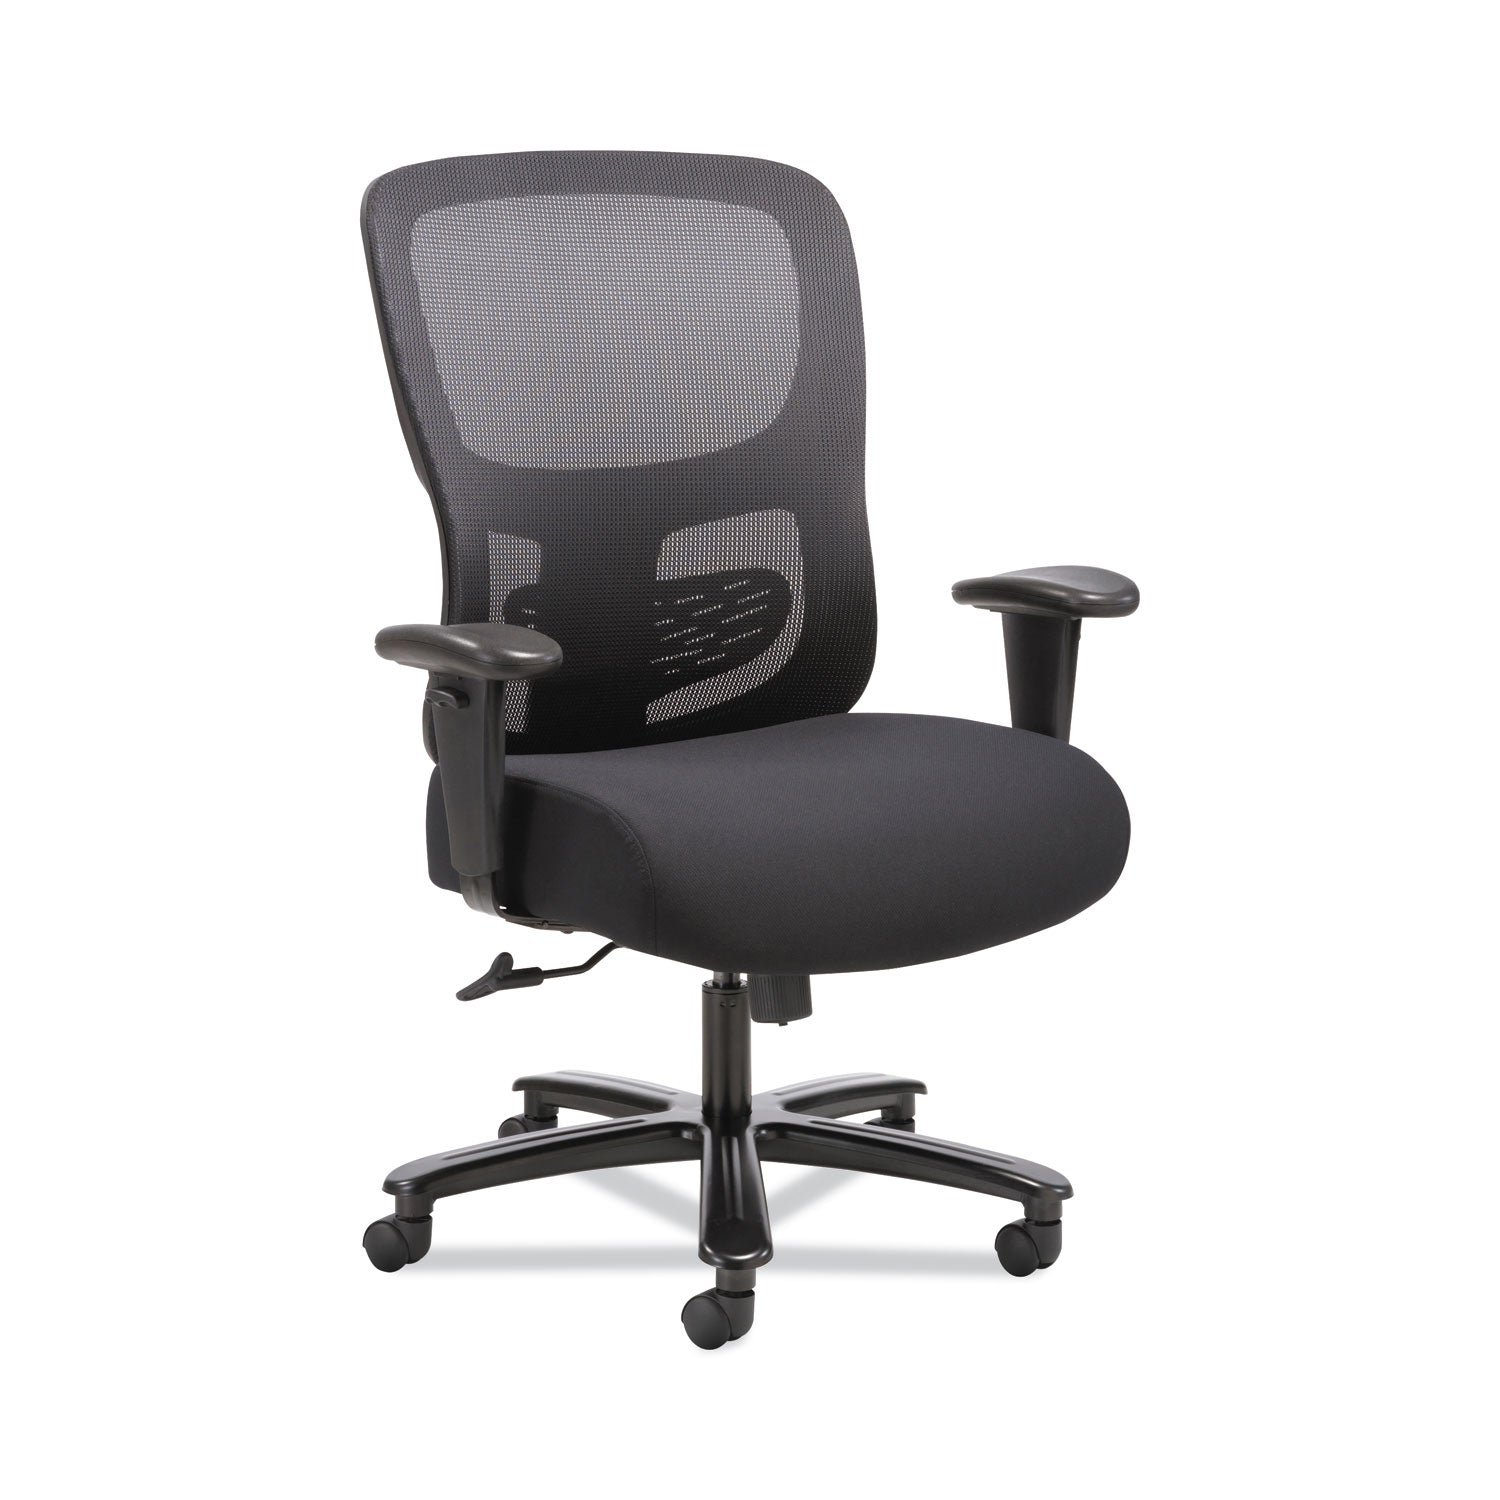 1-fourty-one-big-tall-mesh-task-chair-supports-up-to-400-lb-192-to-2285-seat-height-black_bsxvst141 - 1